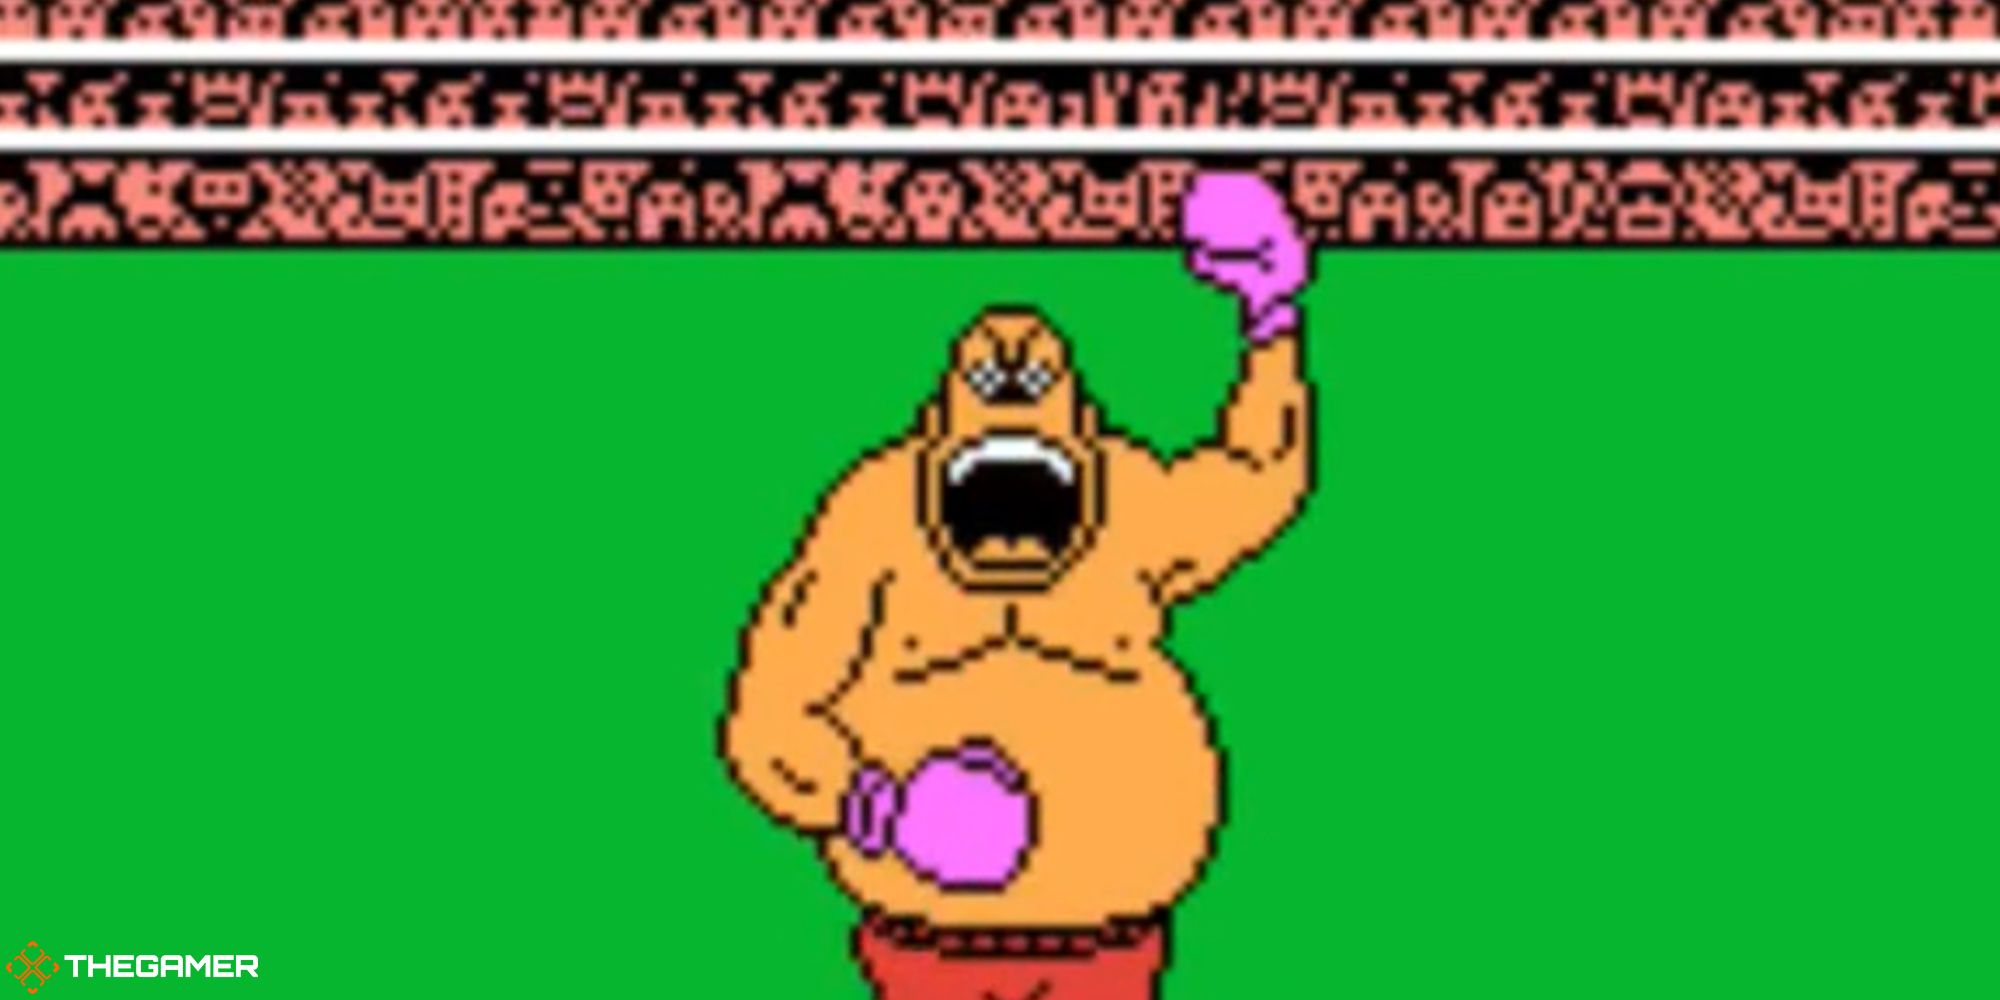 Nintendo's Punch-Out!!: 15 Tricks To Make Your Way To Mike Tyson